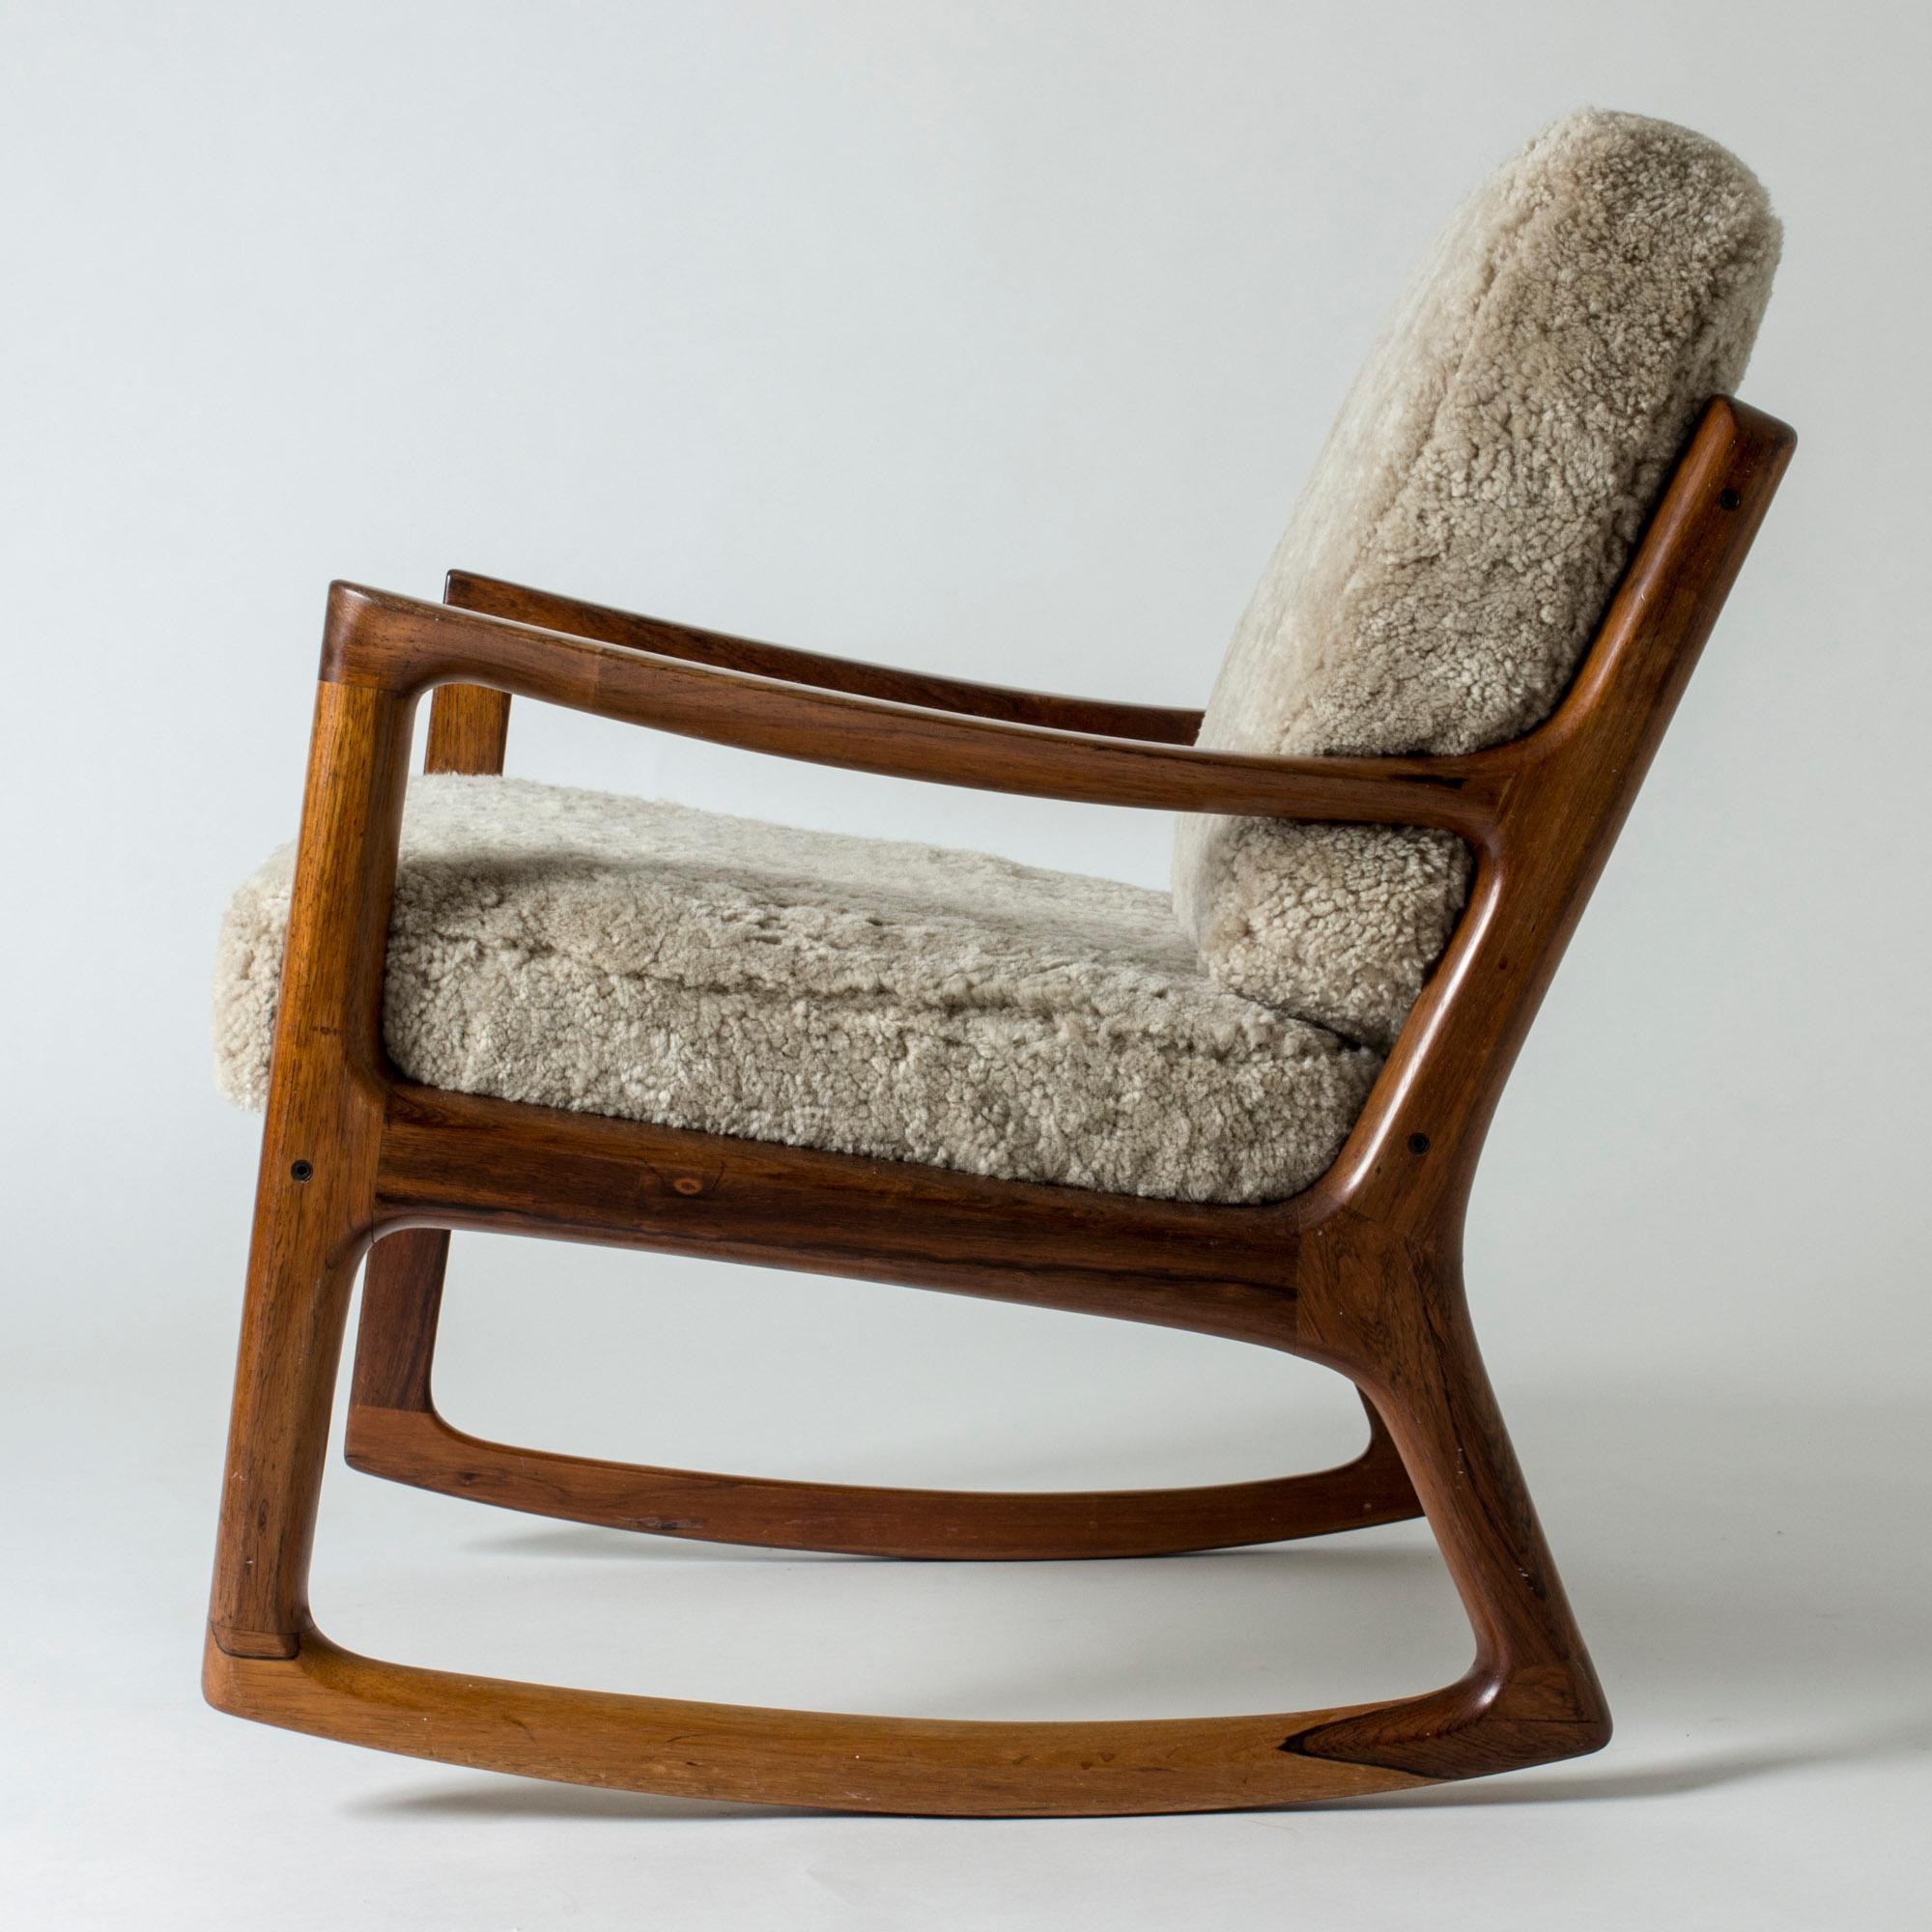 Amazing “Senator” rosewood rocking chair by Ole Wanscher. Beautiful, streamlined frame with an open silhouette, cushions upholstered with sheepskin.